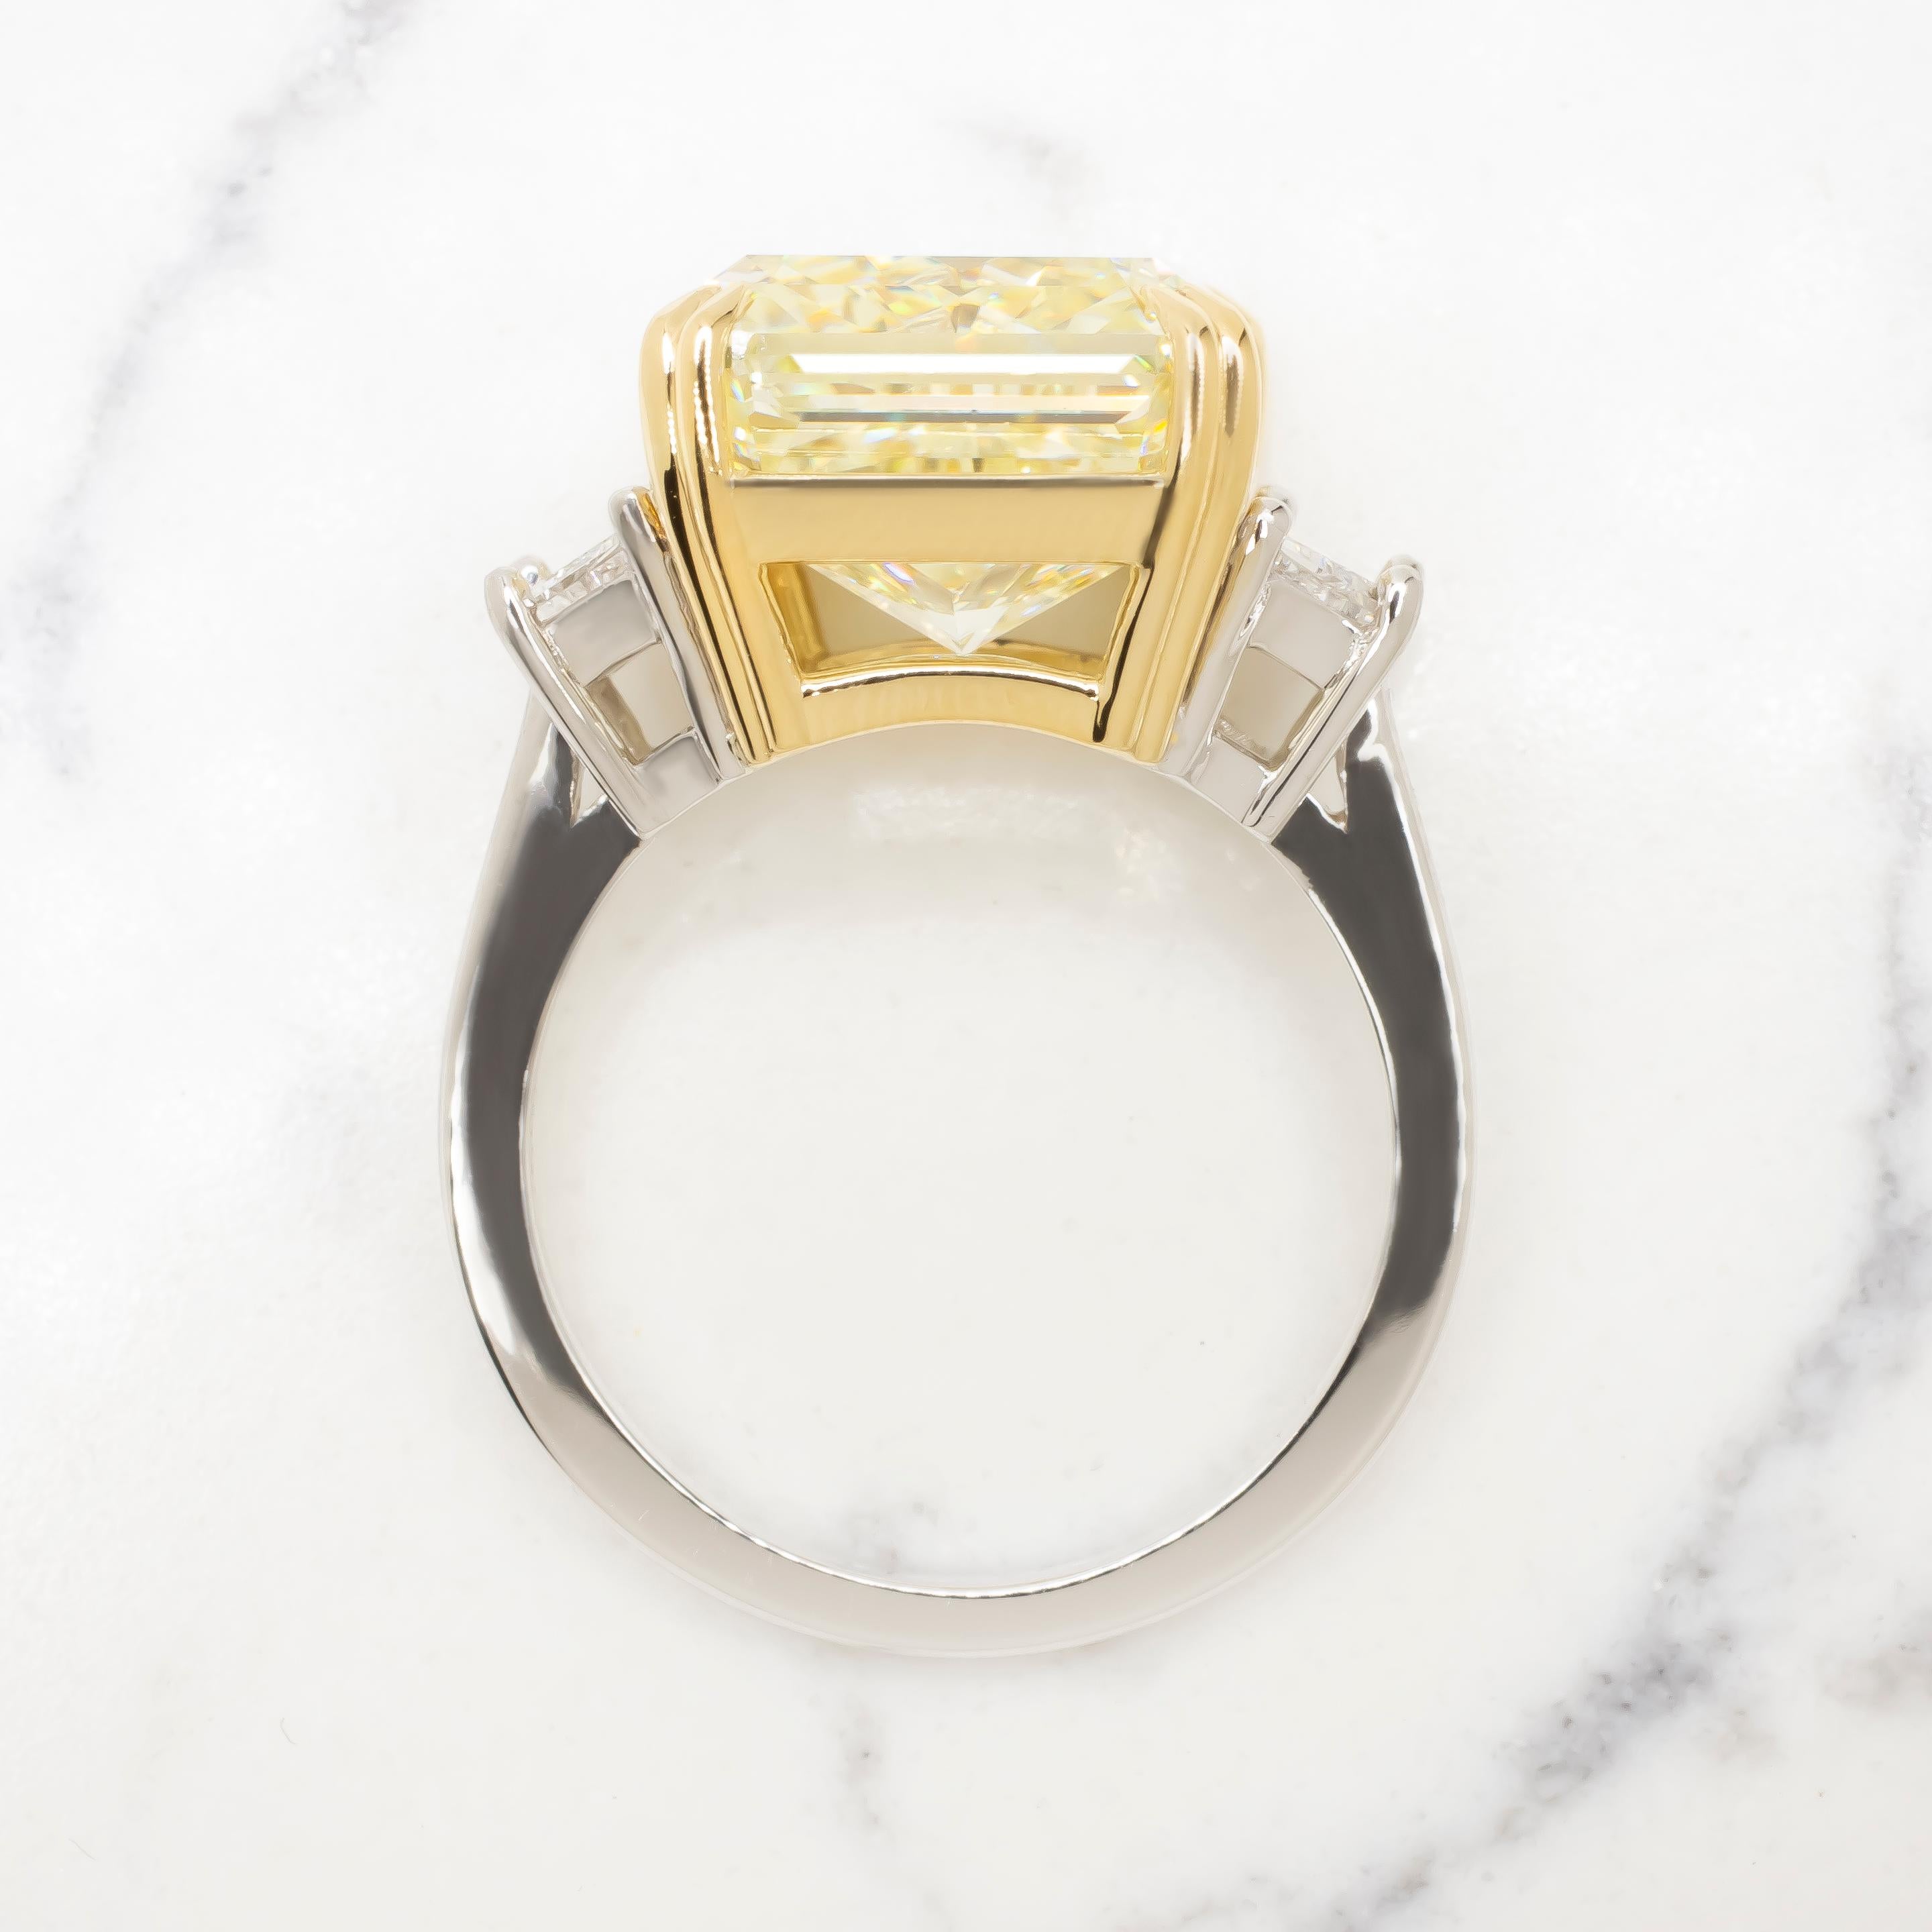 Exuding unparalleled radiance and sophistication, this GIA Certified 10.07 Carat Radiant Fancy Yellow with Trapezoid Diamond Ring is a true masterpiece of elegance. At its heart lies a captivating radiant cut fancy yellow diamond, certified by the